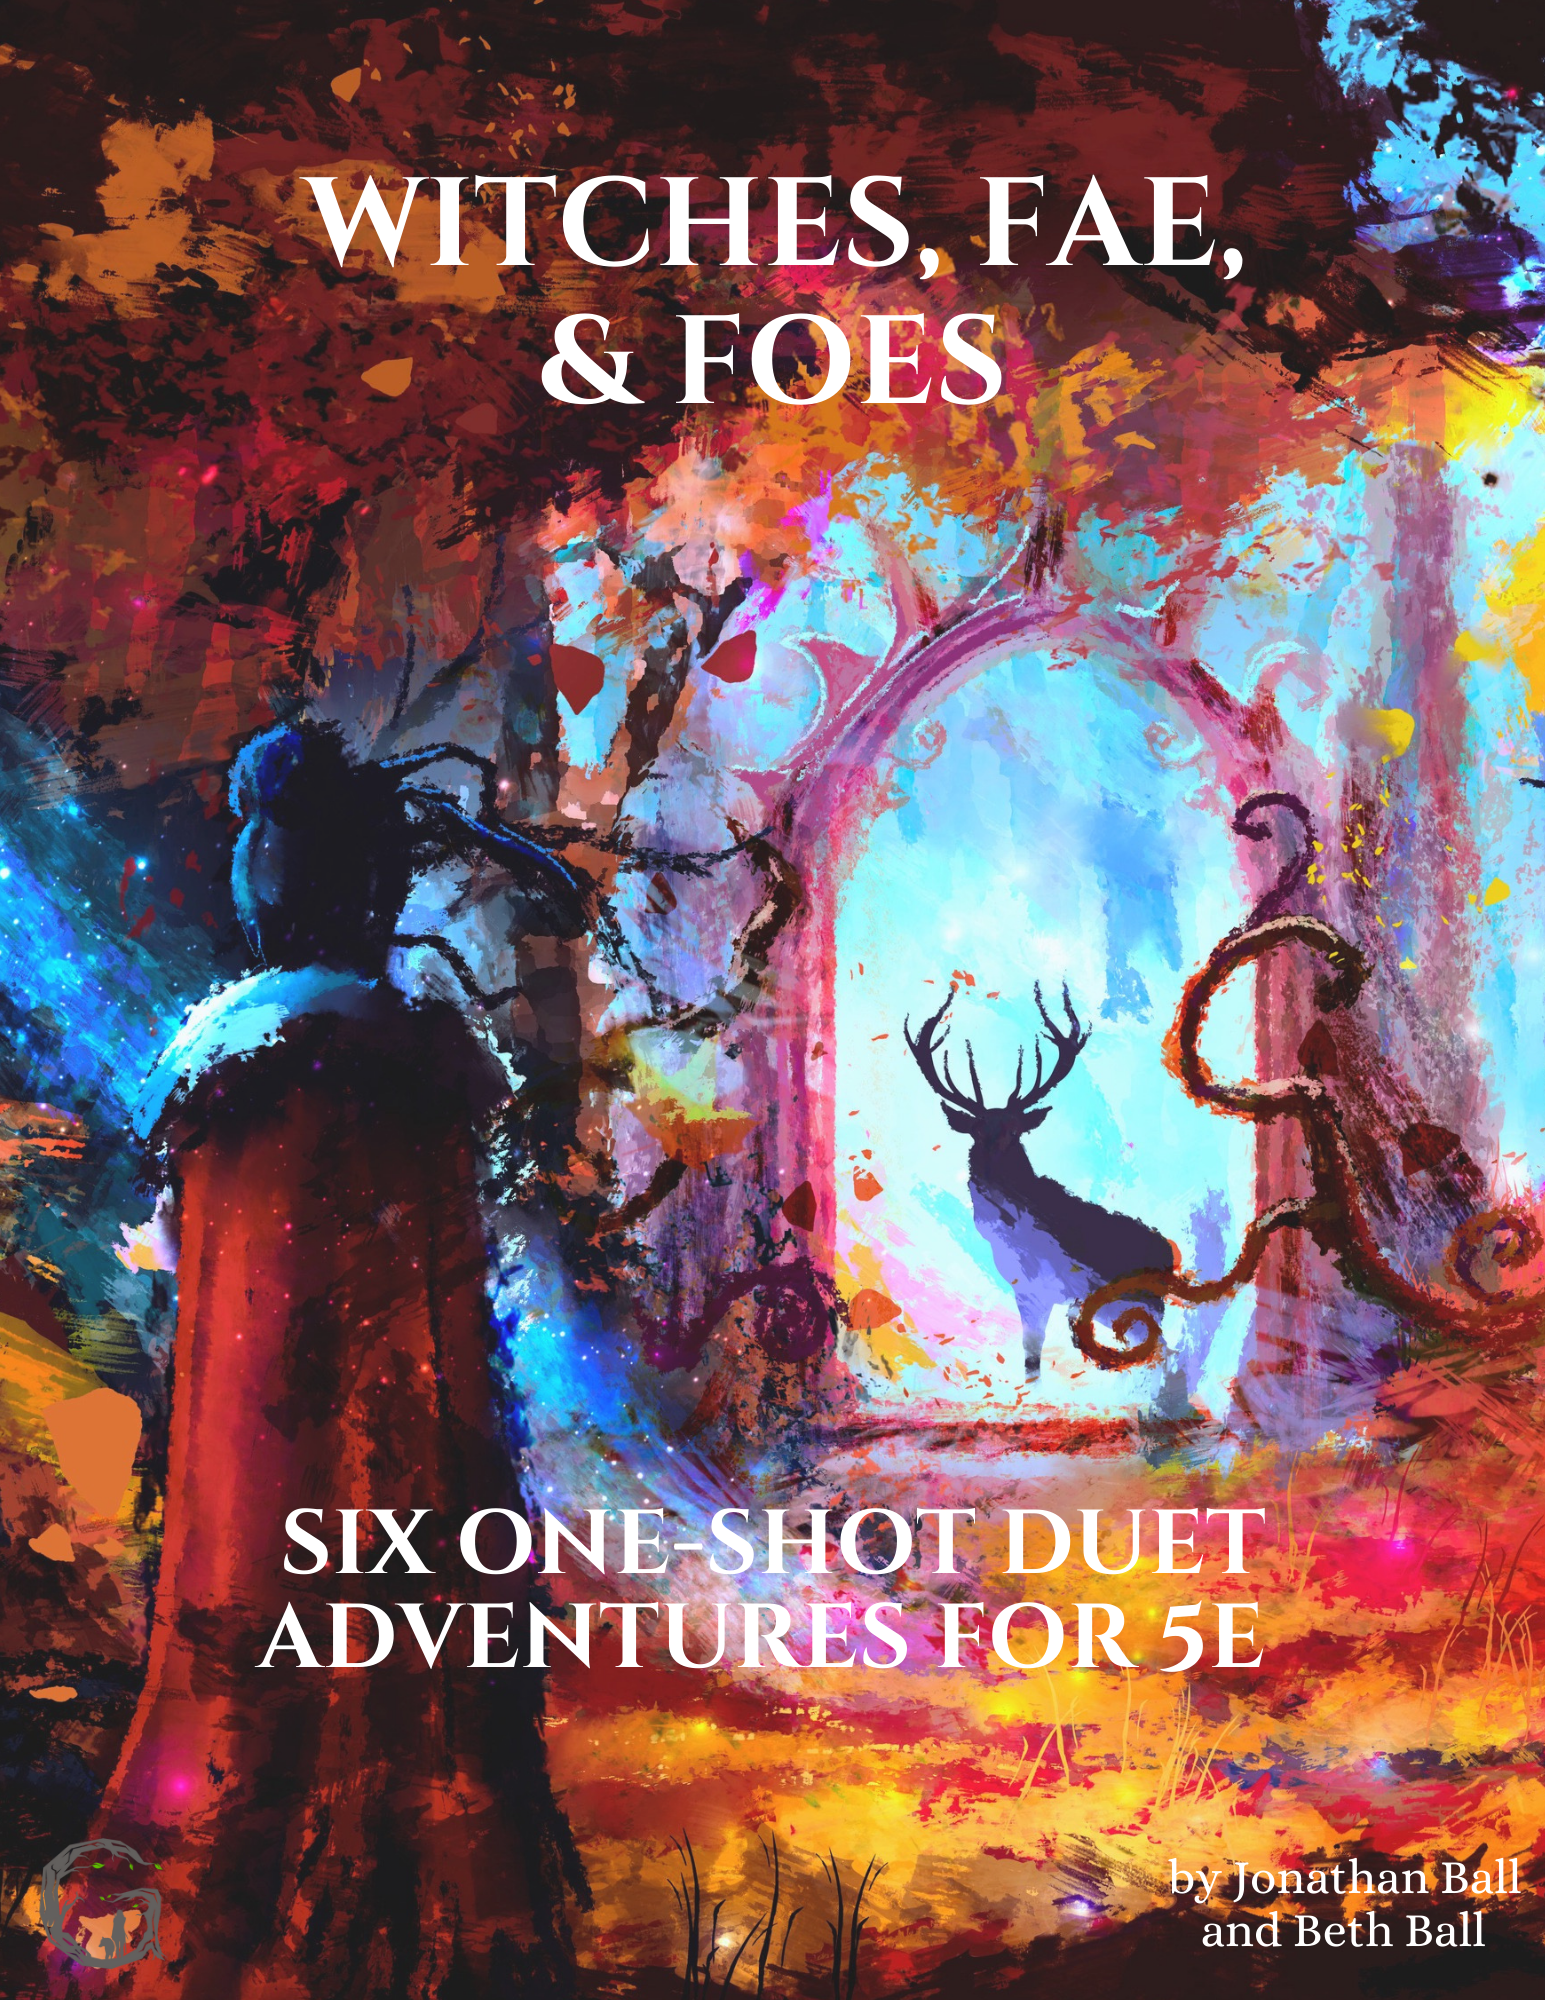 Witches, Fae, and Foes: Six One-Shot Duet 5e Adventures (digital edition)